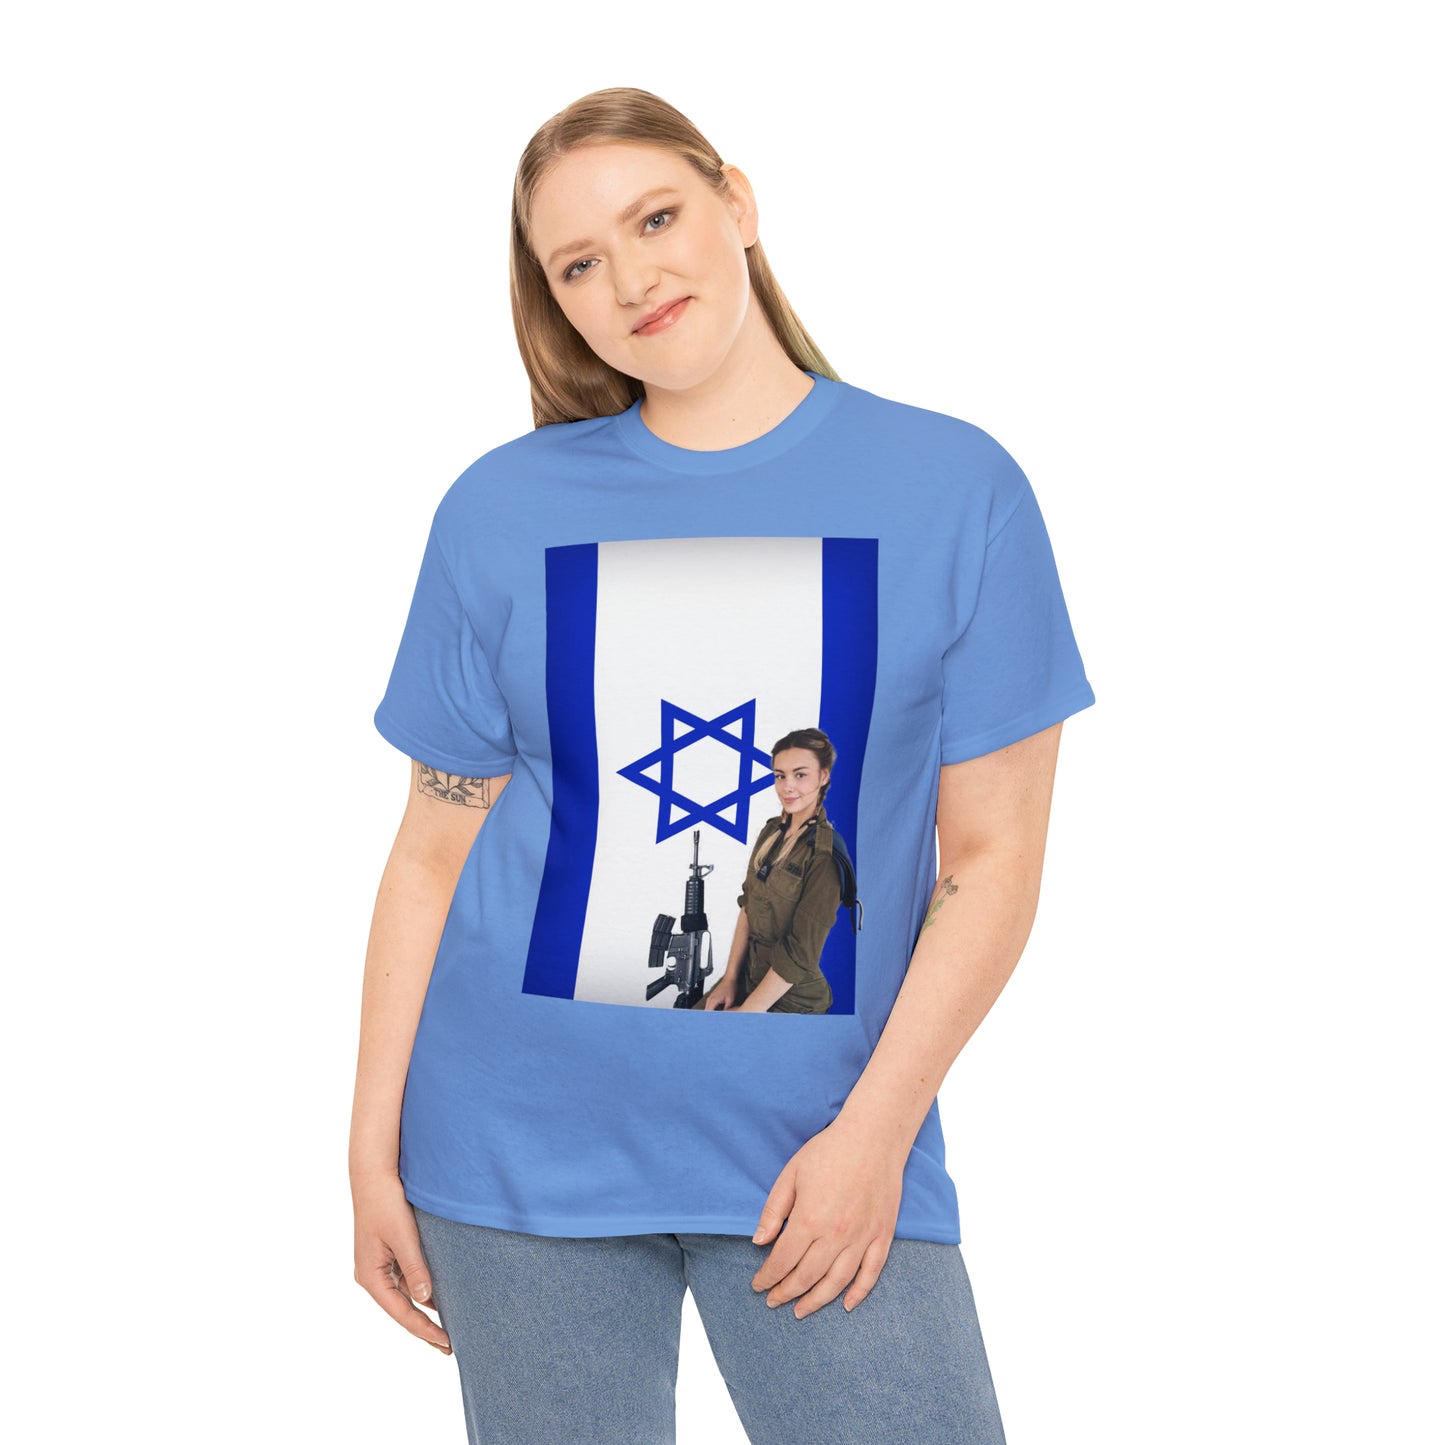 IDF Female Soldier - Hurts Shirts Collection